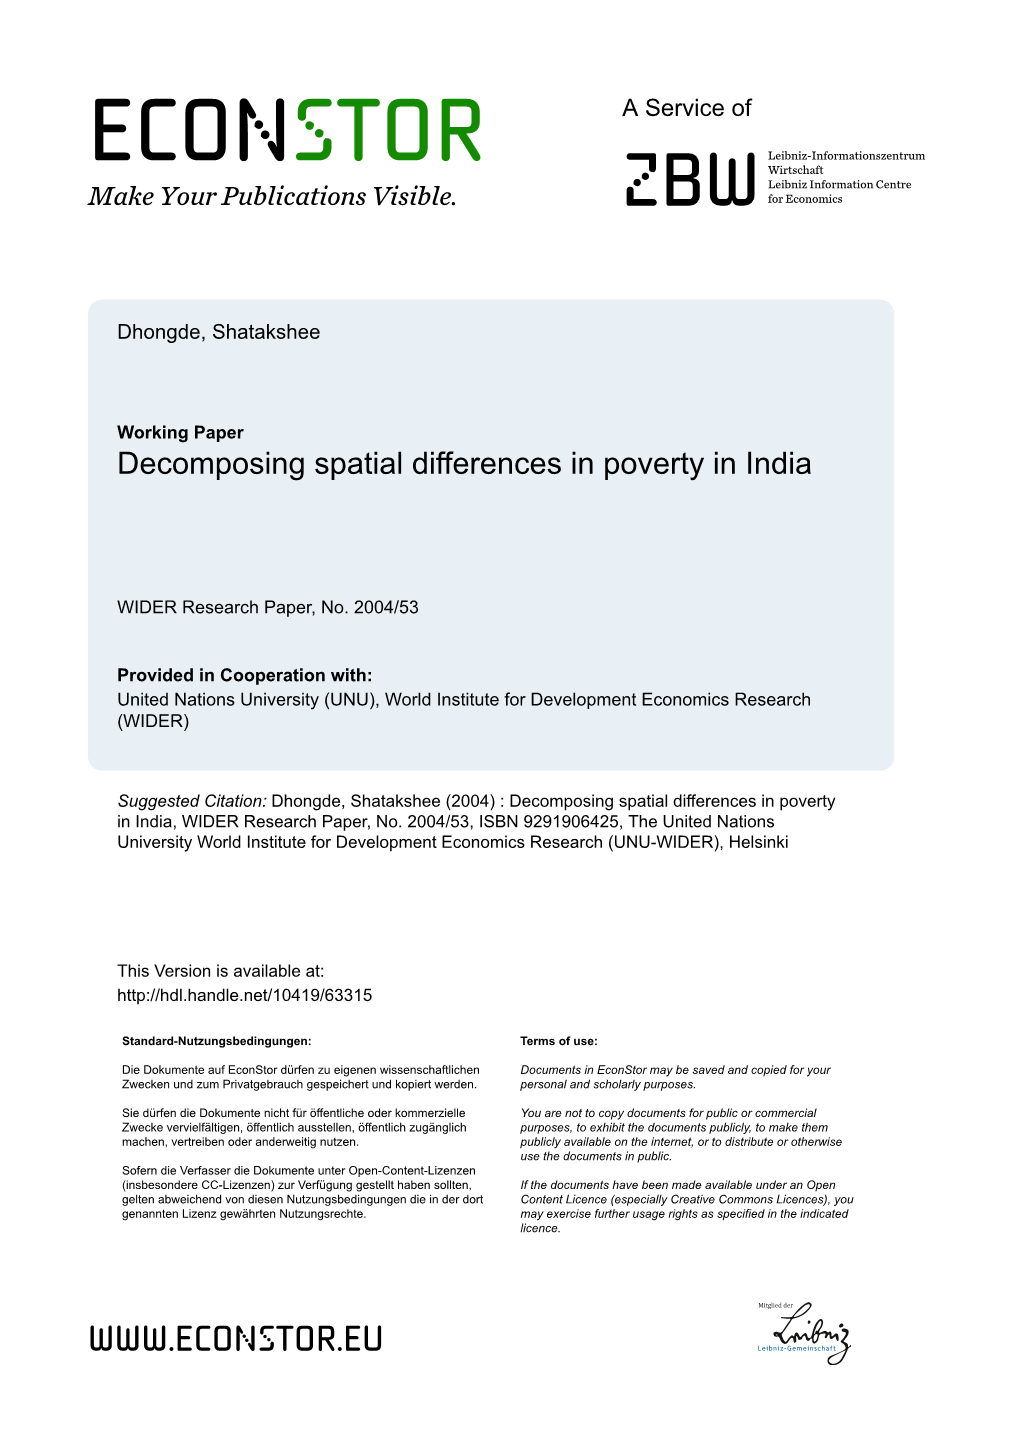 Decomposing Spatial Differences in Poverty in India